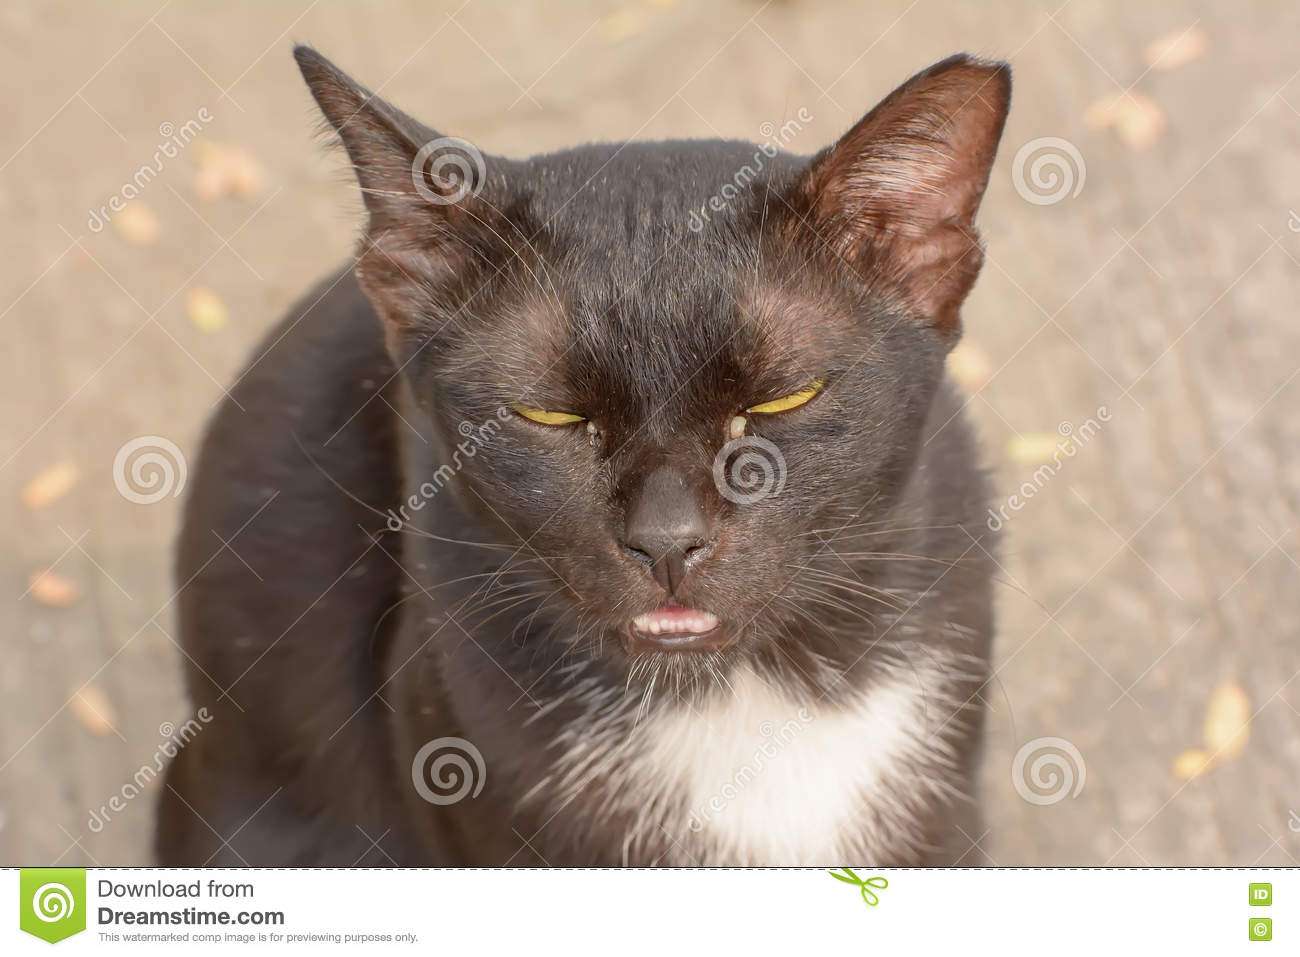 Eye boogers in cats stock image. Image of close, cats ...